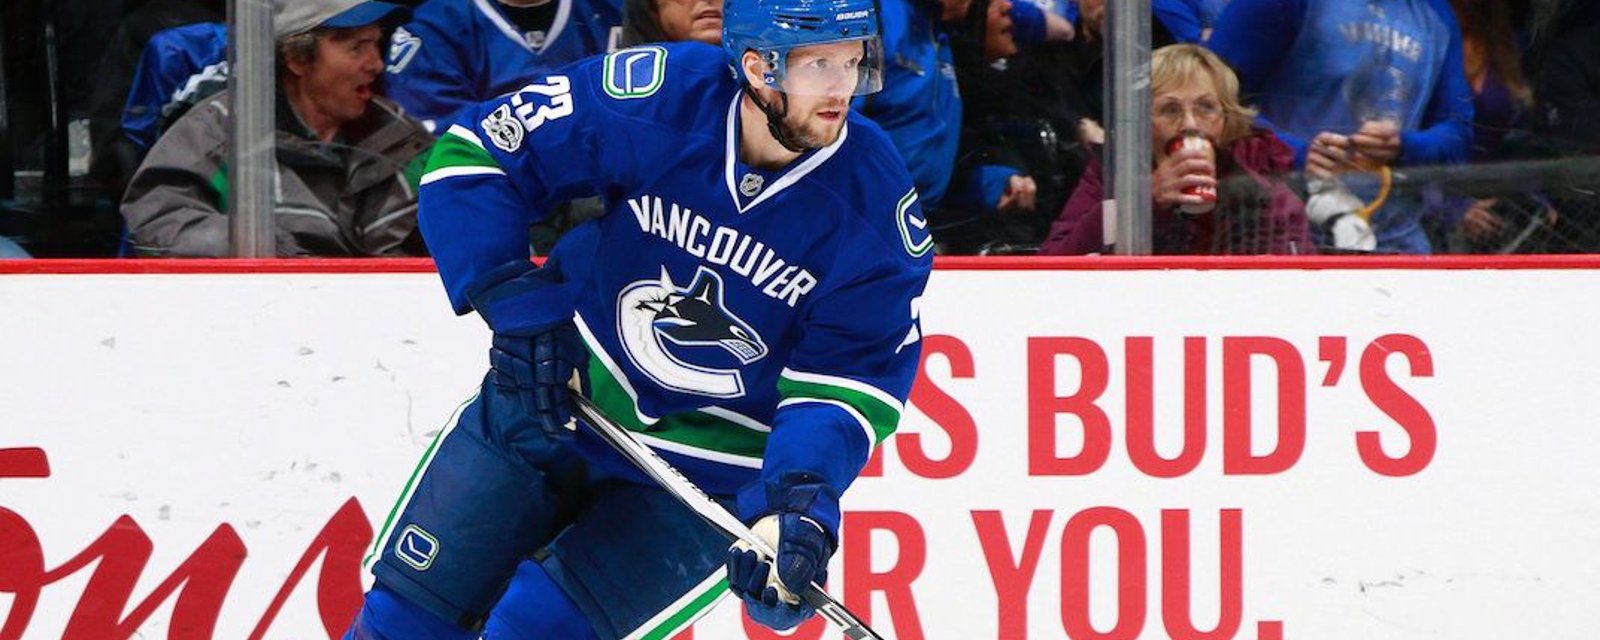 13 teams watching Canucks' Edler in hopes to acquire him! 